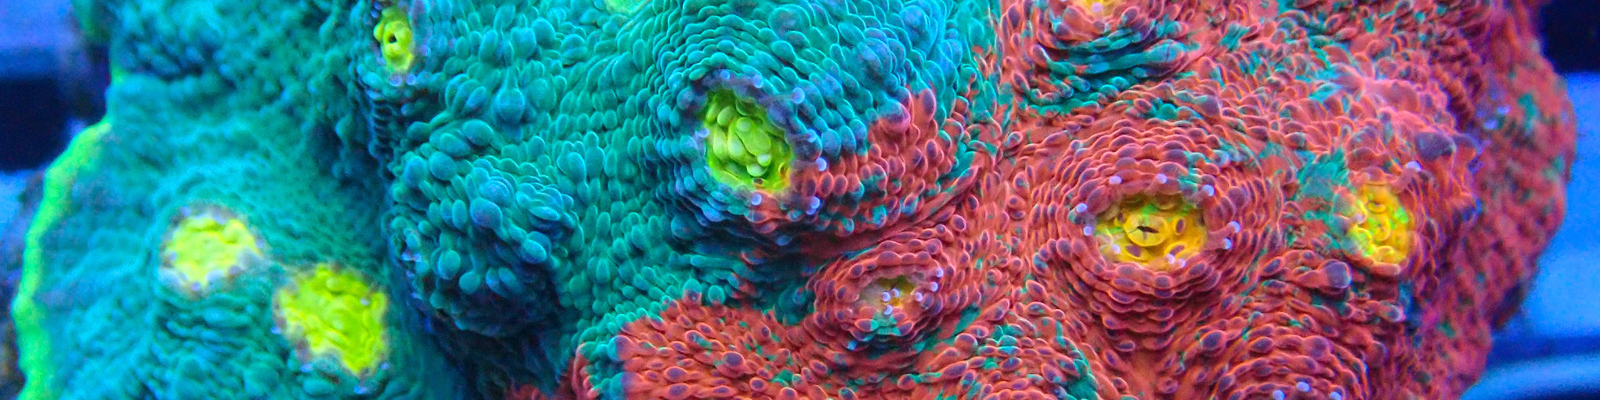 Sps Coral